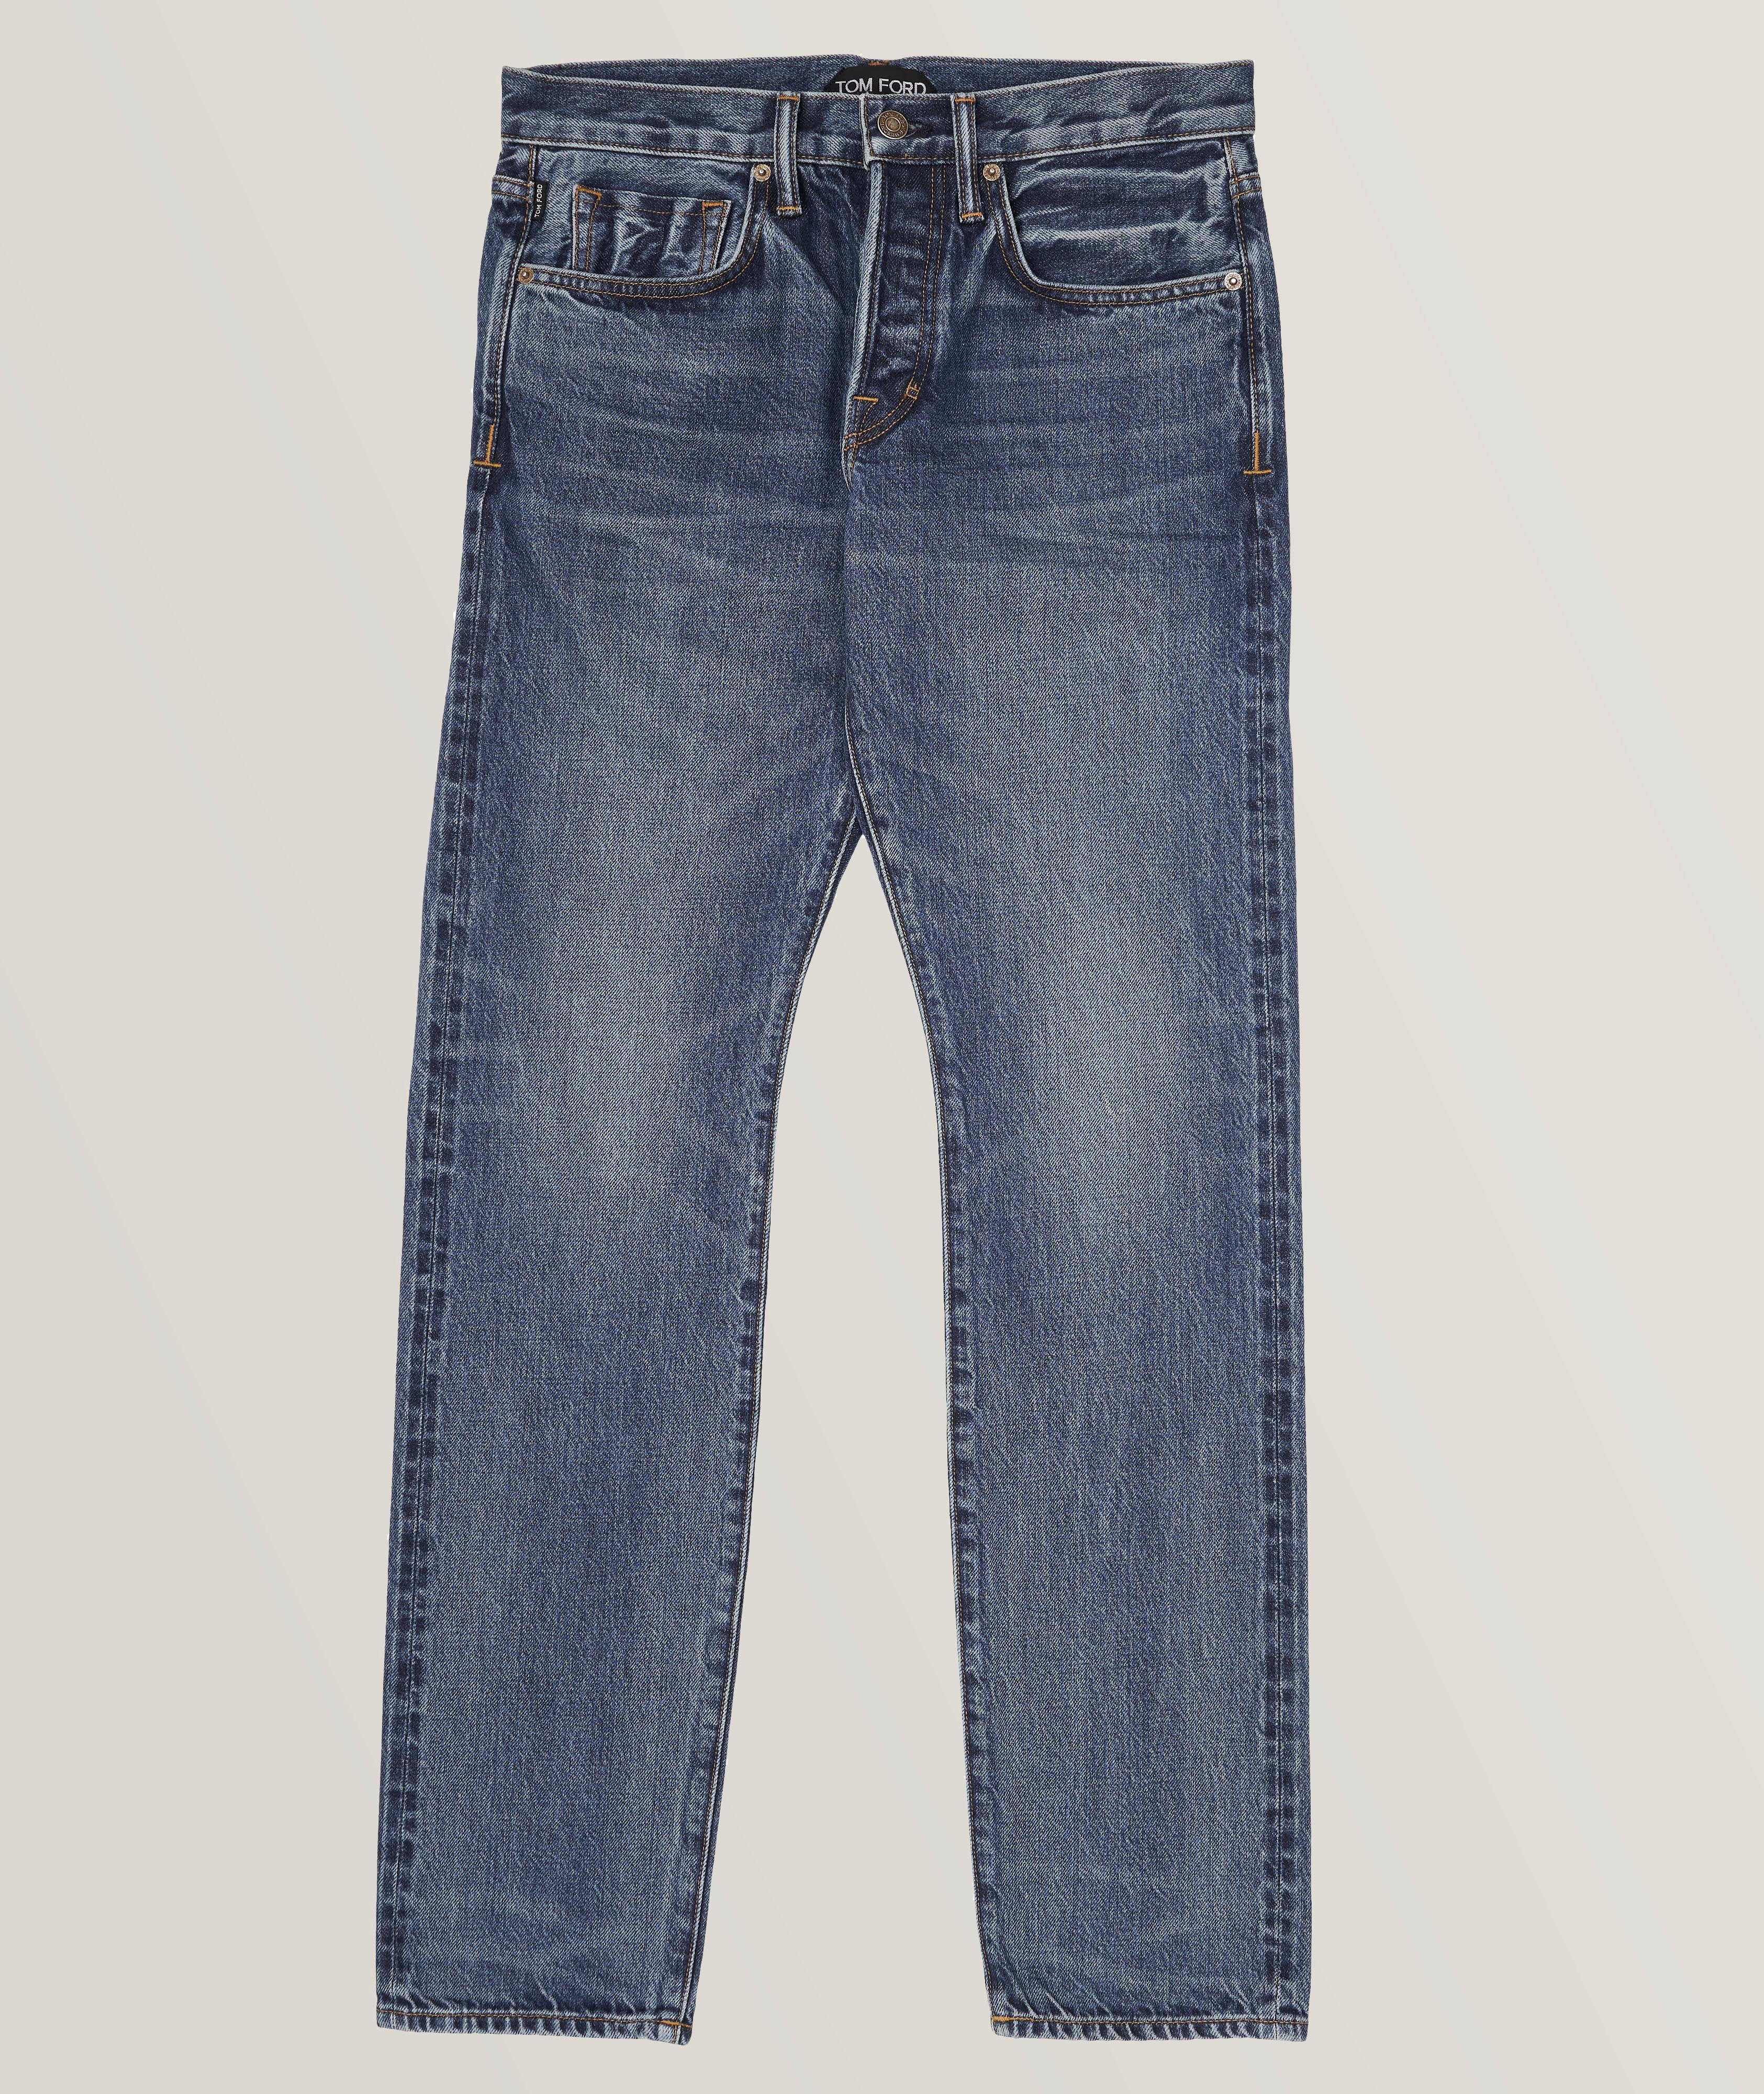 TOM FORD Slim Fit Washed Demin Cotton Jeans